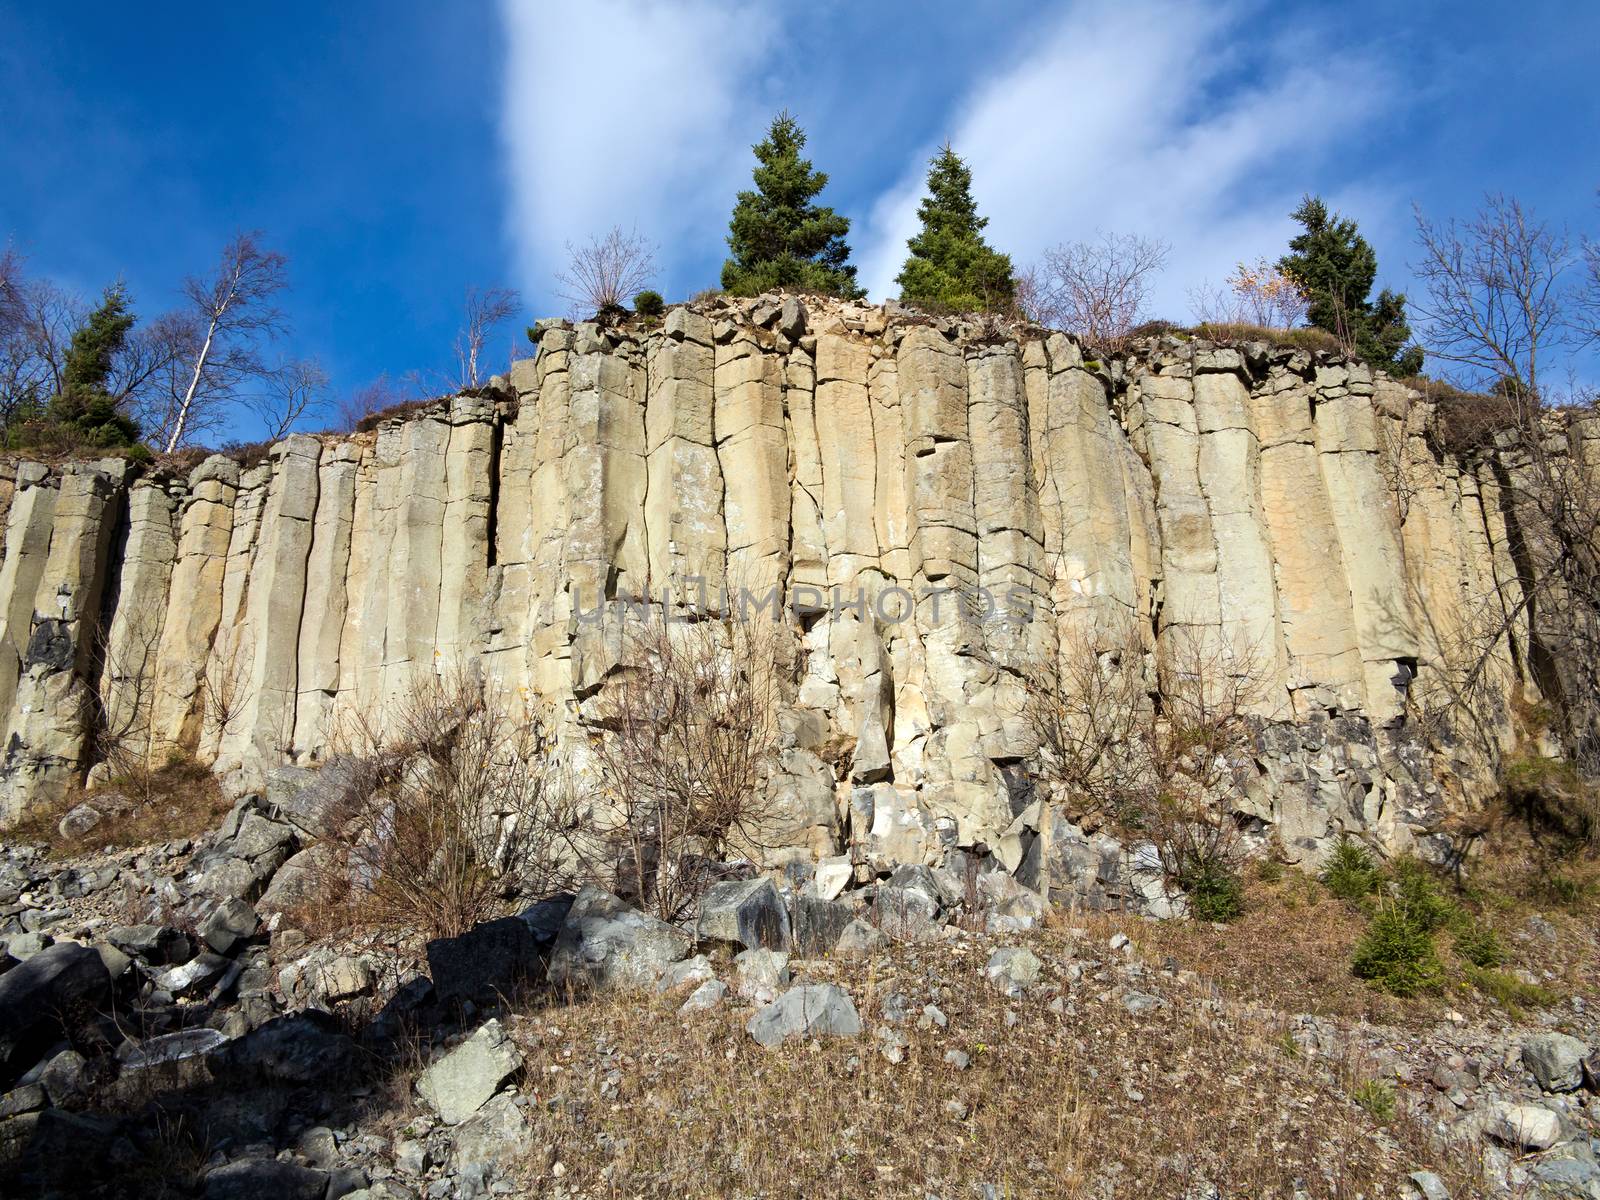 Image of the old basalt quarry in The Ore Mountains - basalt columnar jointing